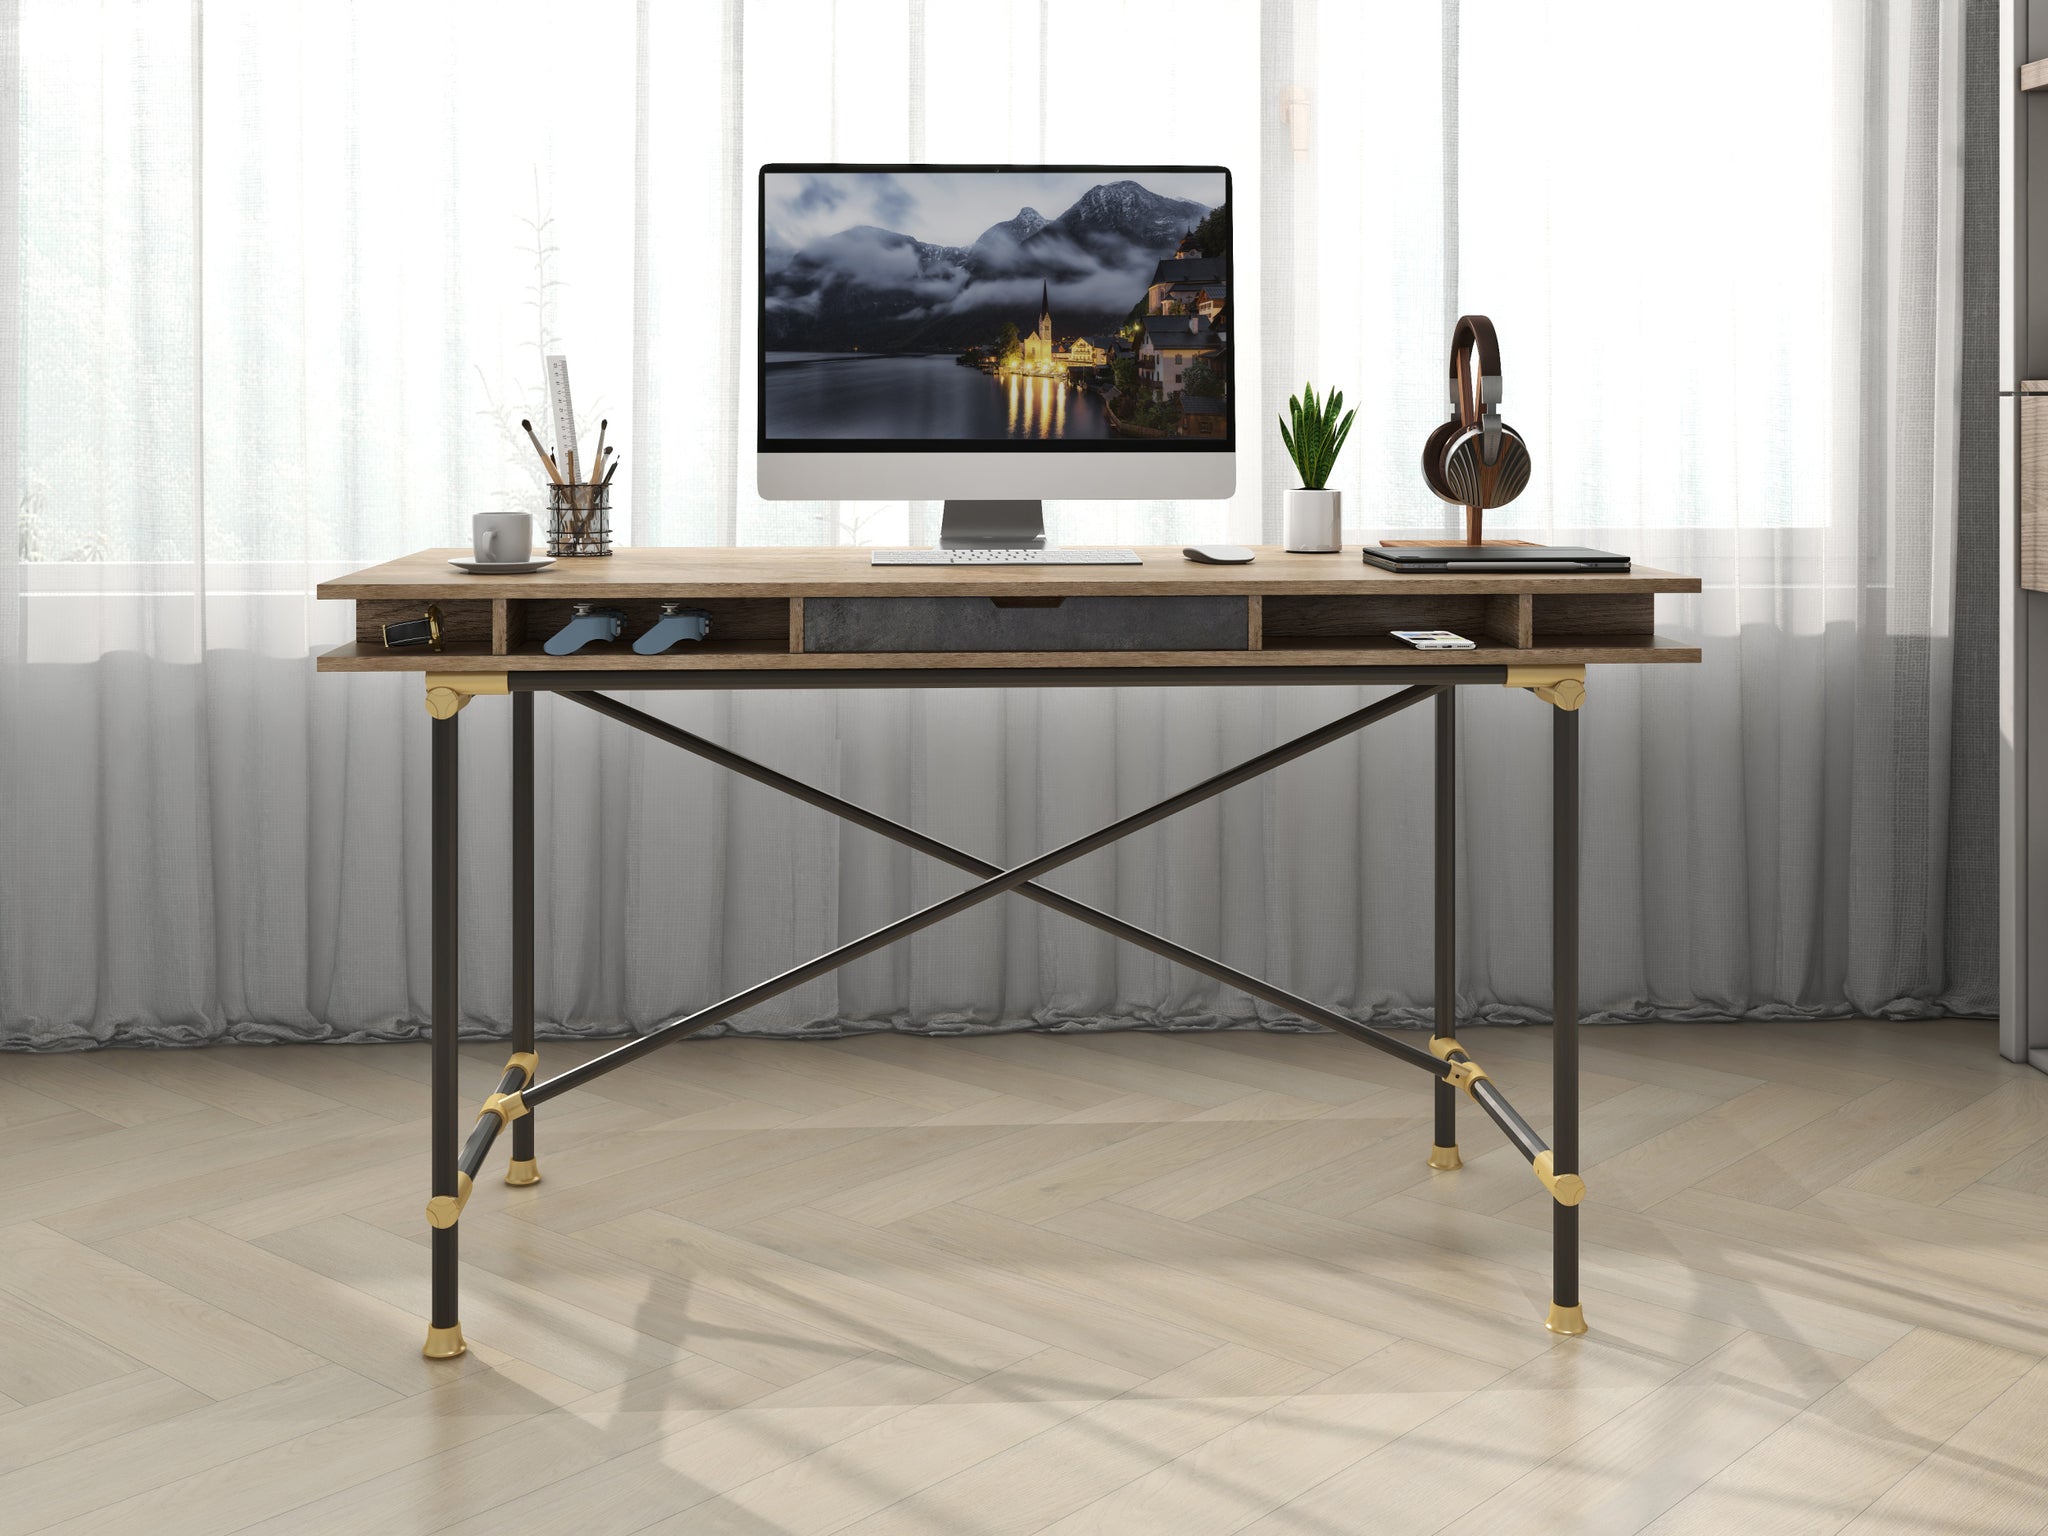 Ld 06c Table Tobacco Wood Office Table fot Home